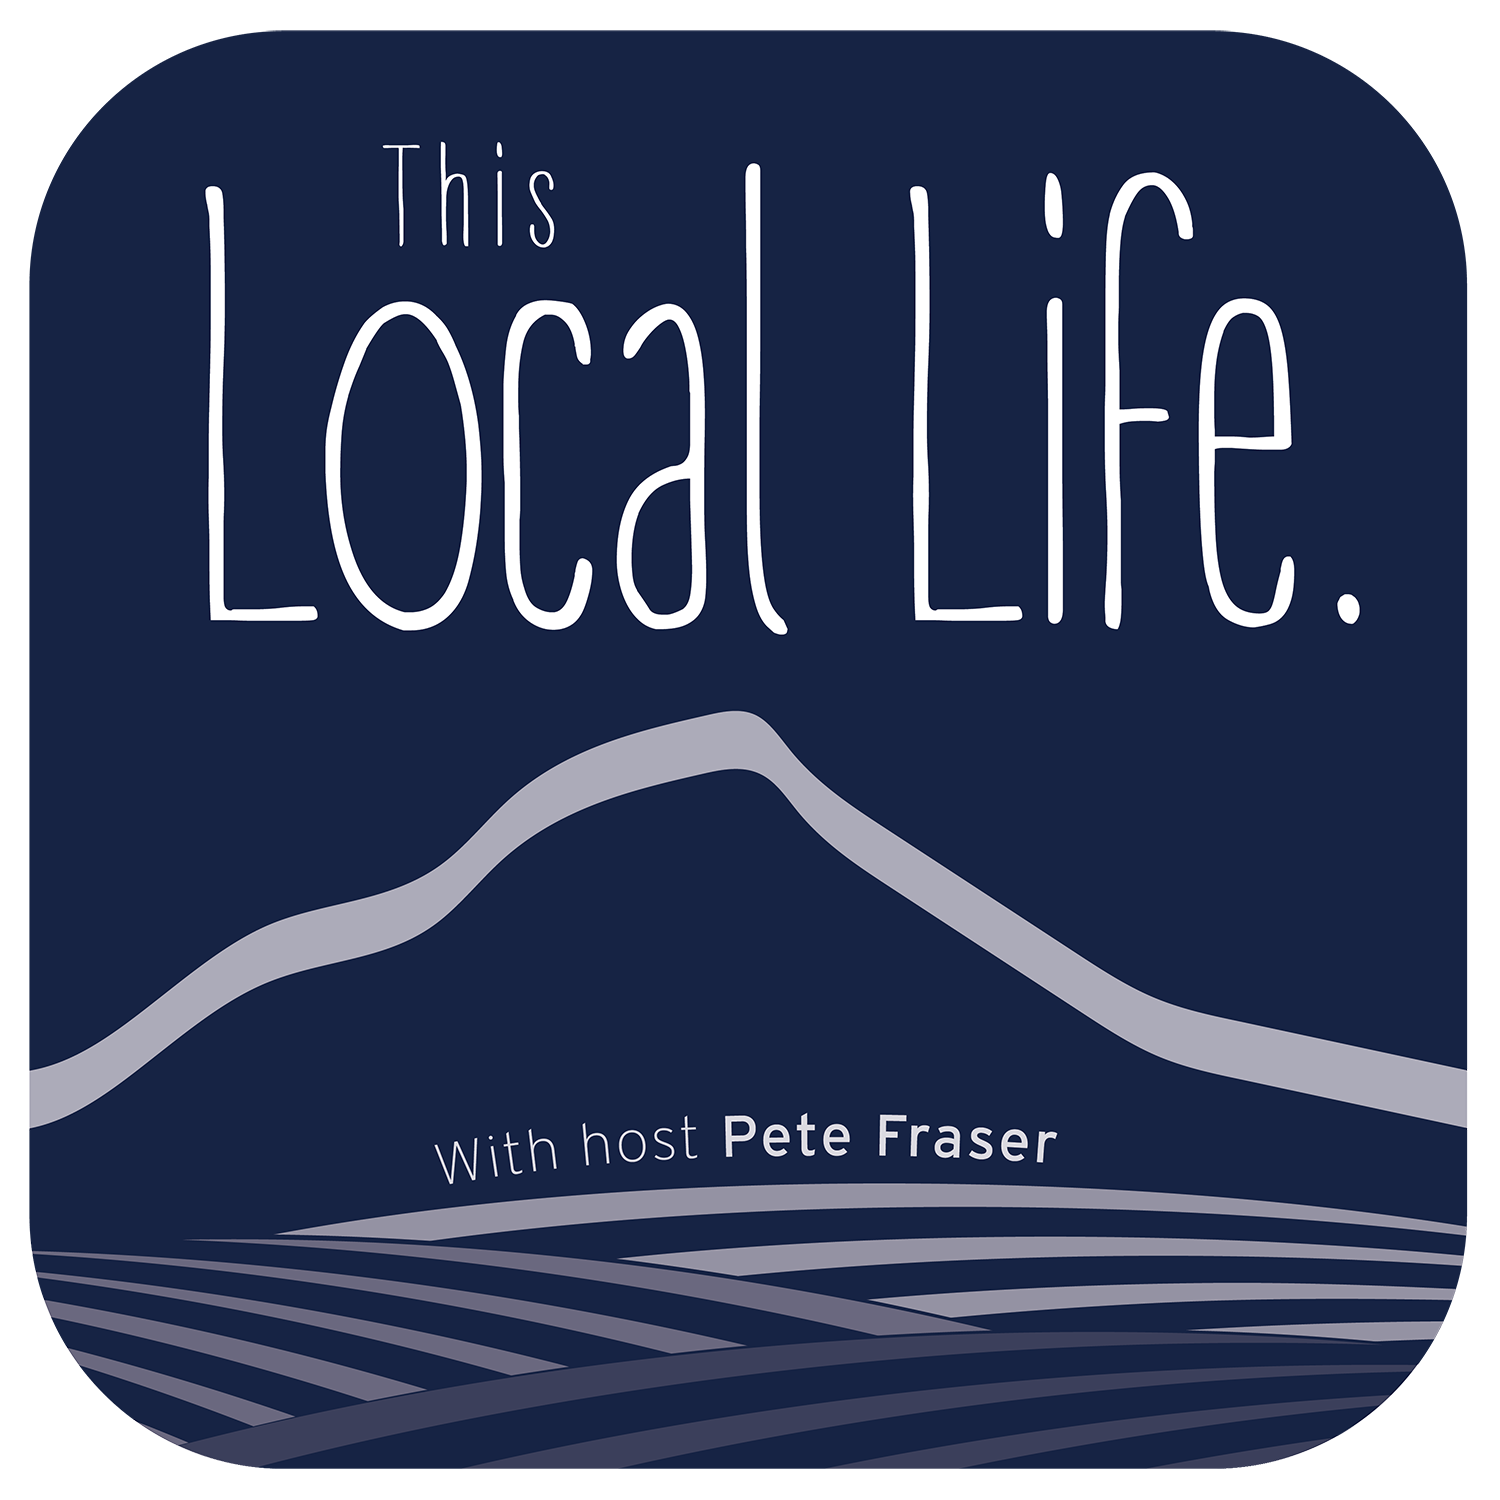 Artwork for podcast This Local Life